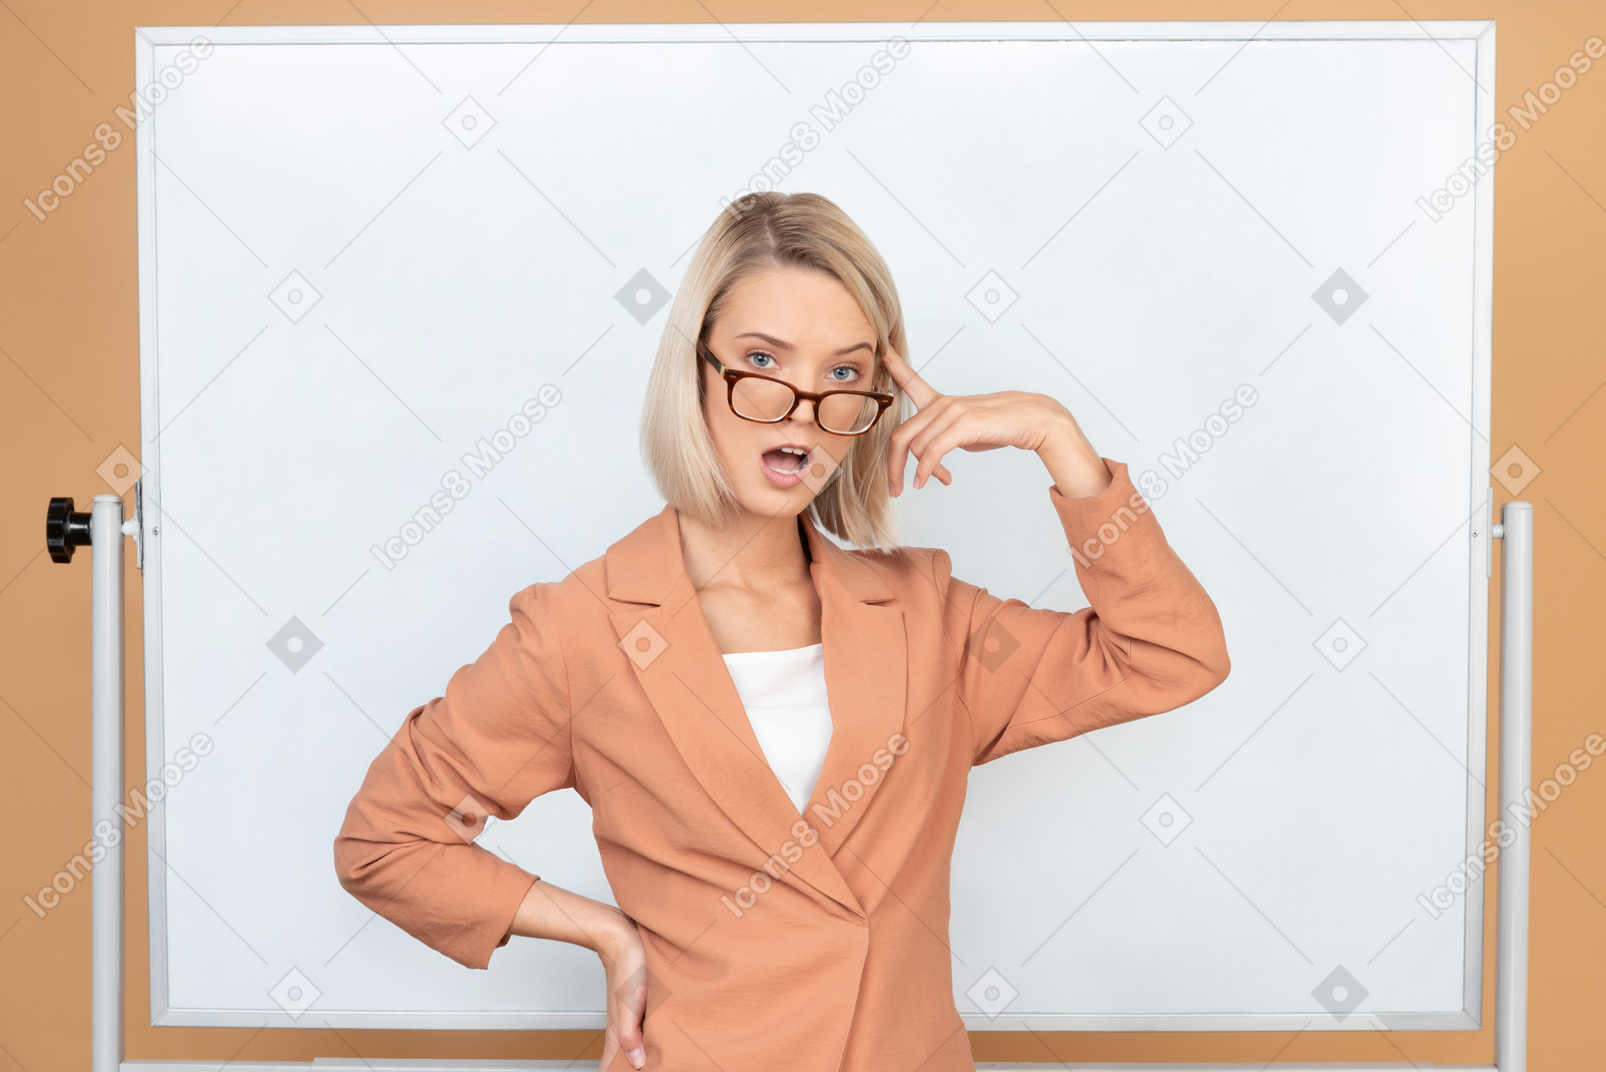 Attractive woman standing holding her finger next to her head